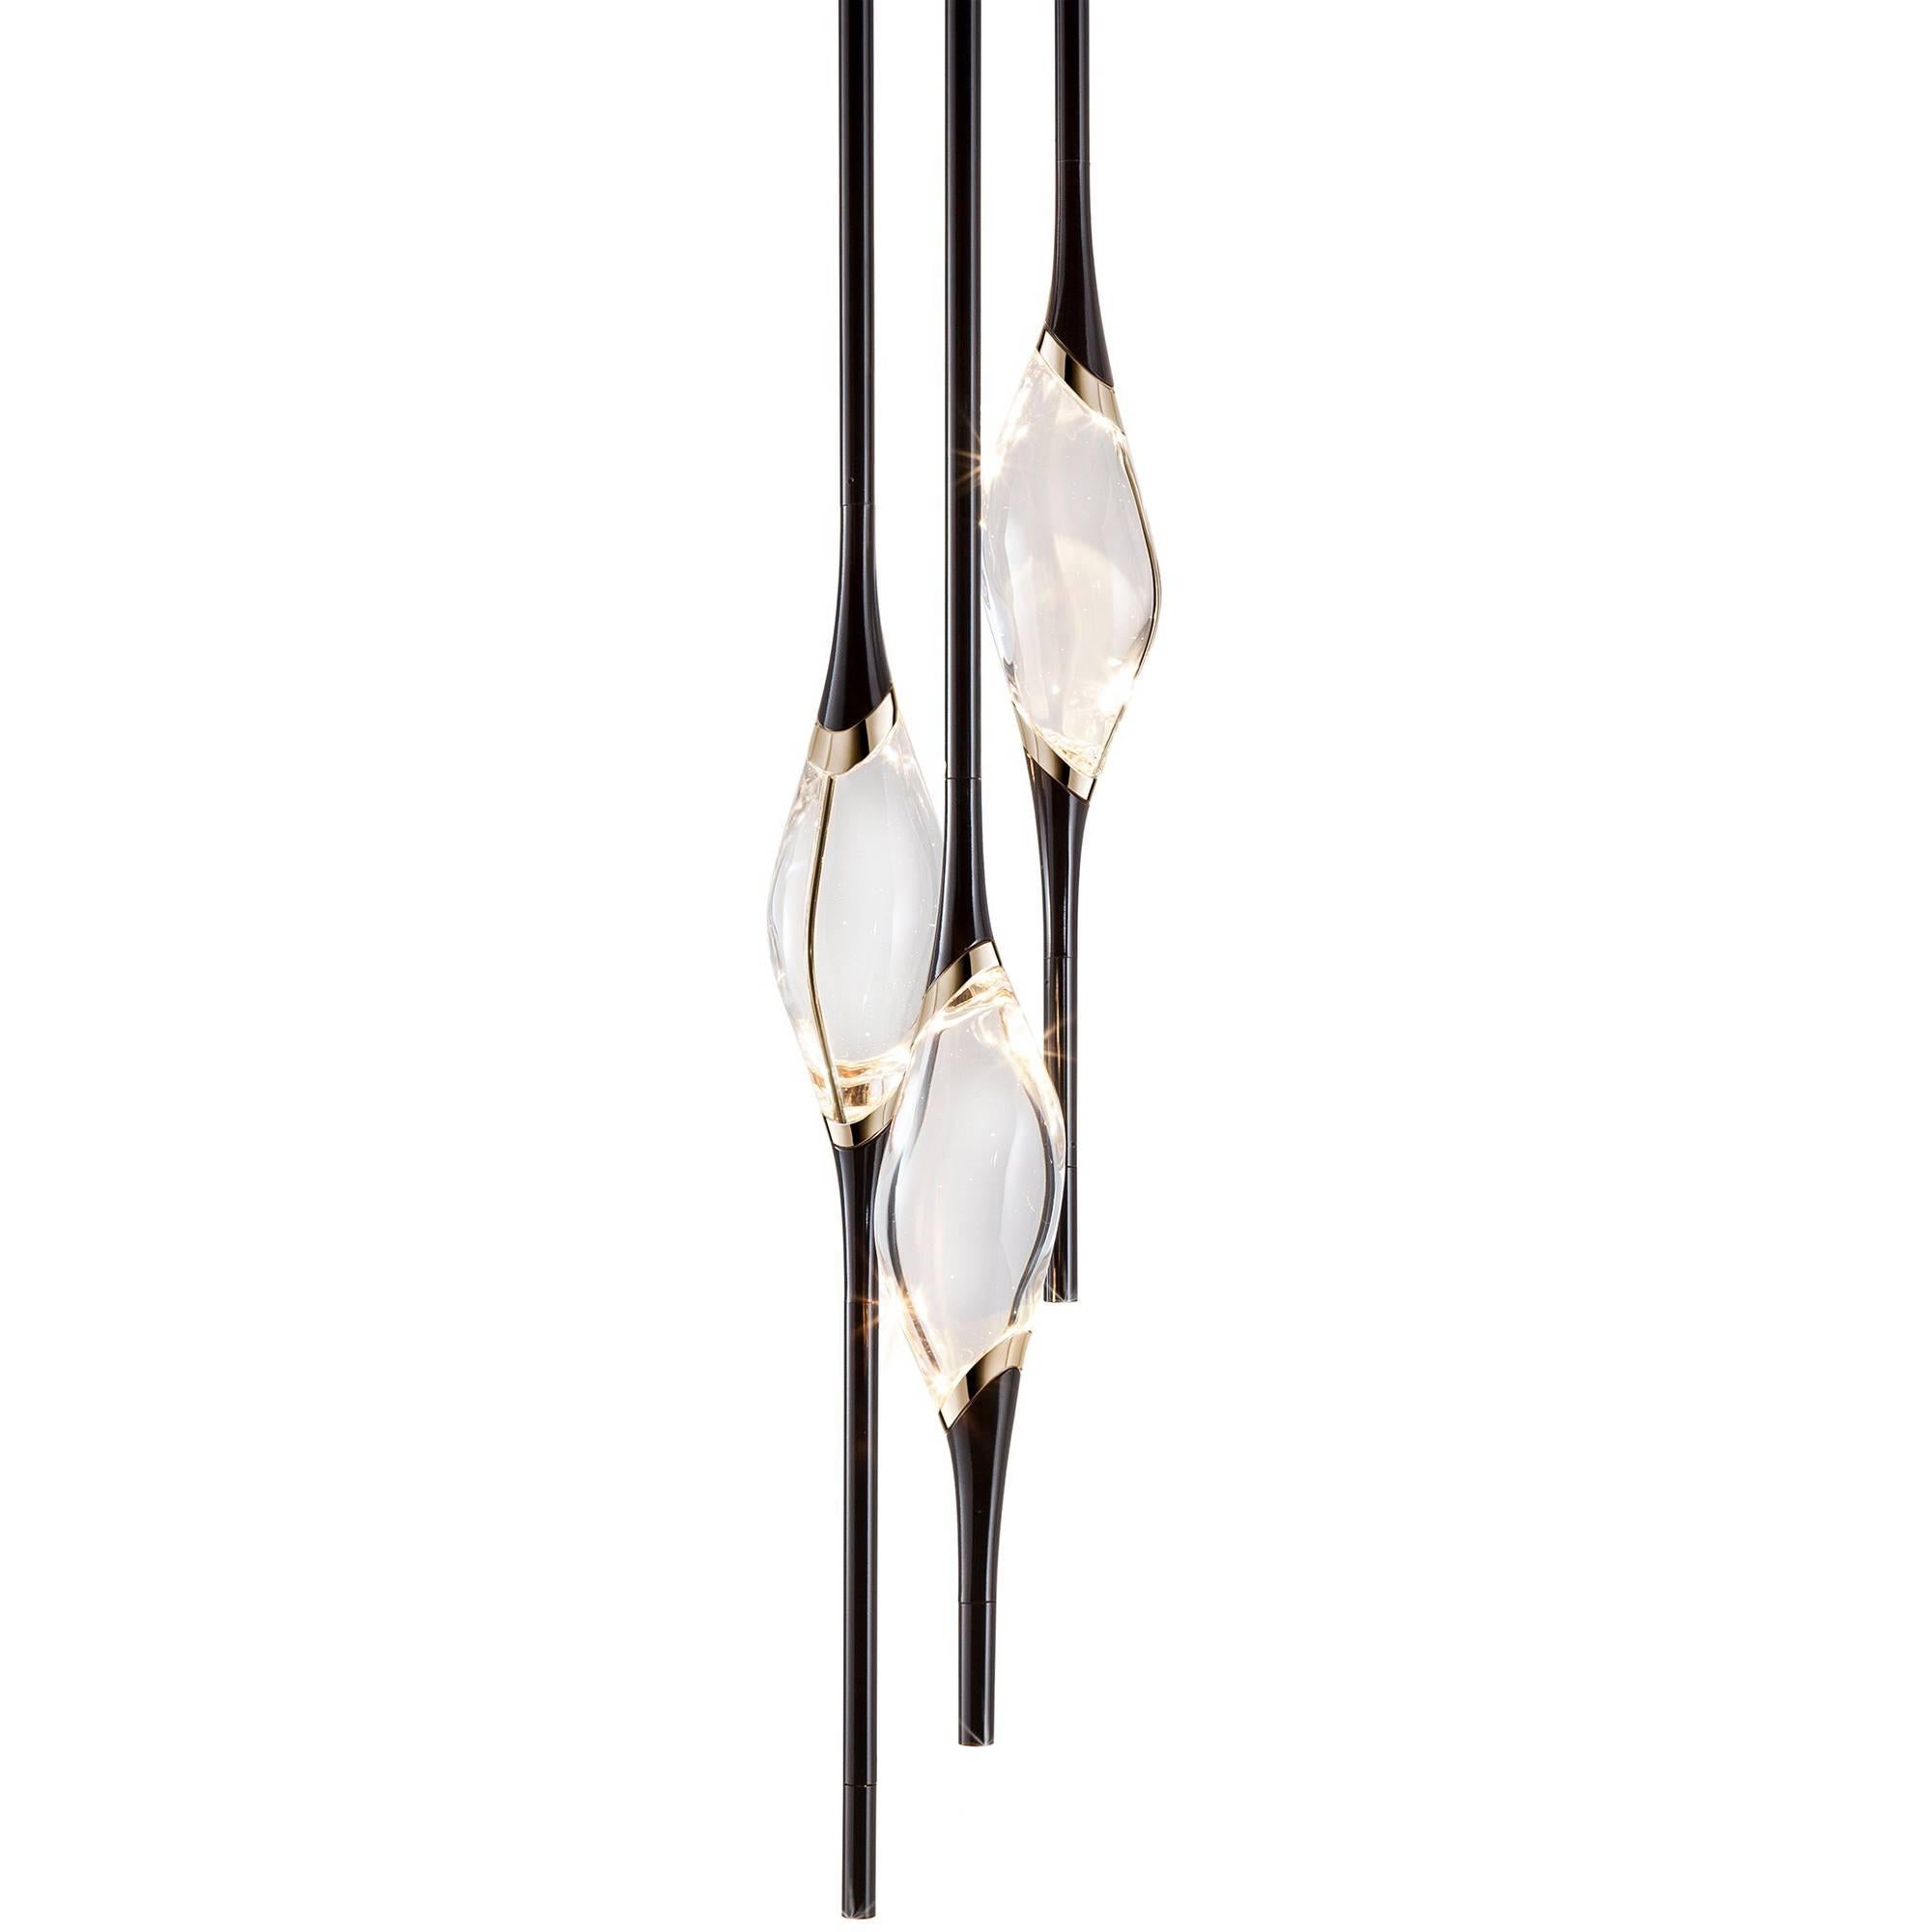 "Il Pezzo 12 Round Chandelier" - height 120cm/47.2" - black and polished brass